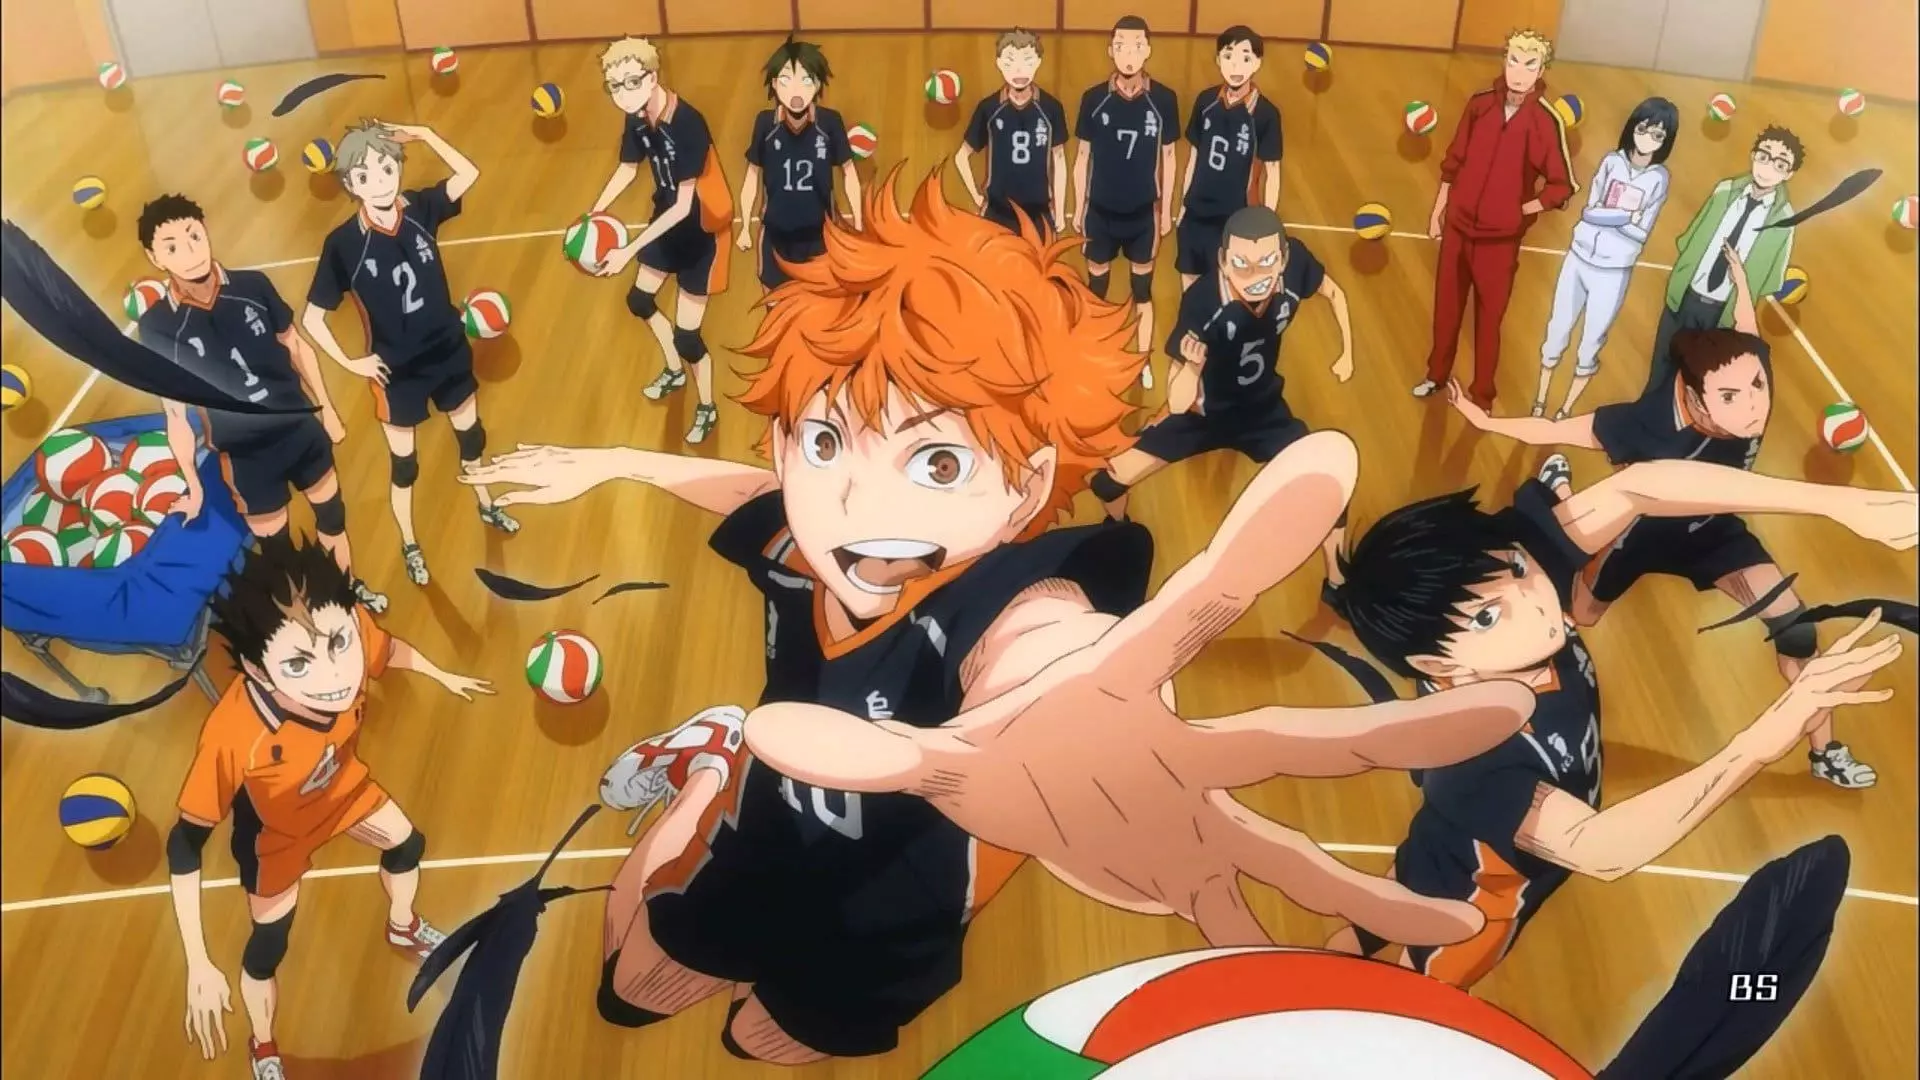 The volleyball team in Haikyuu anime